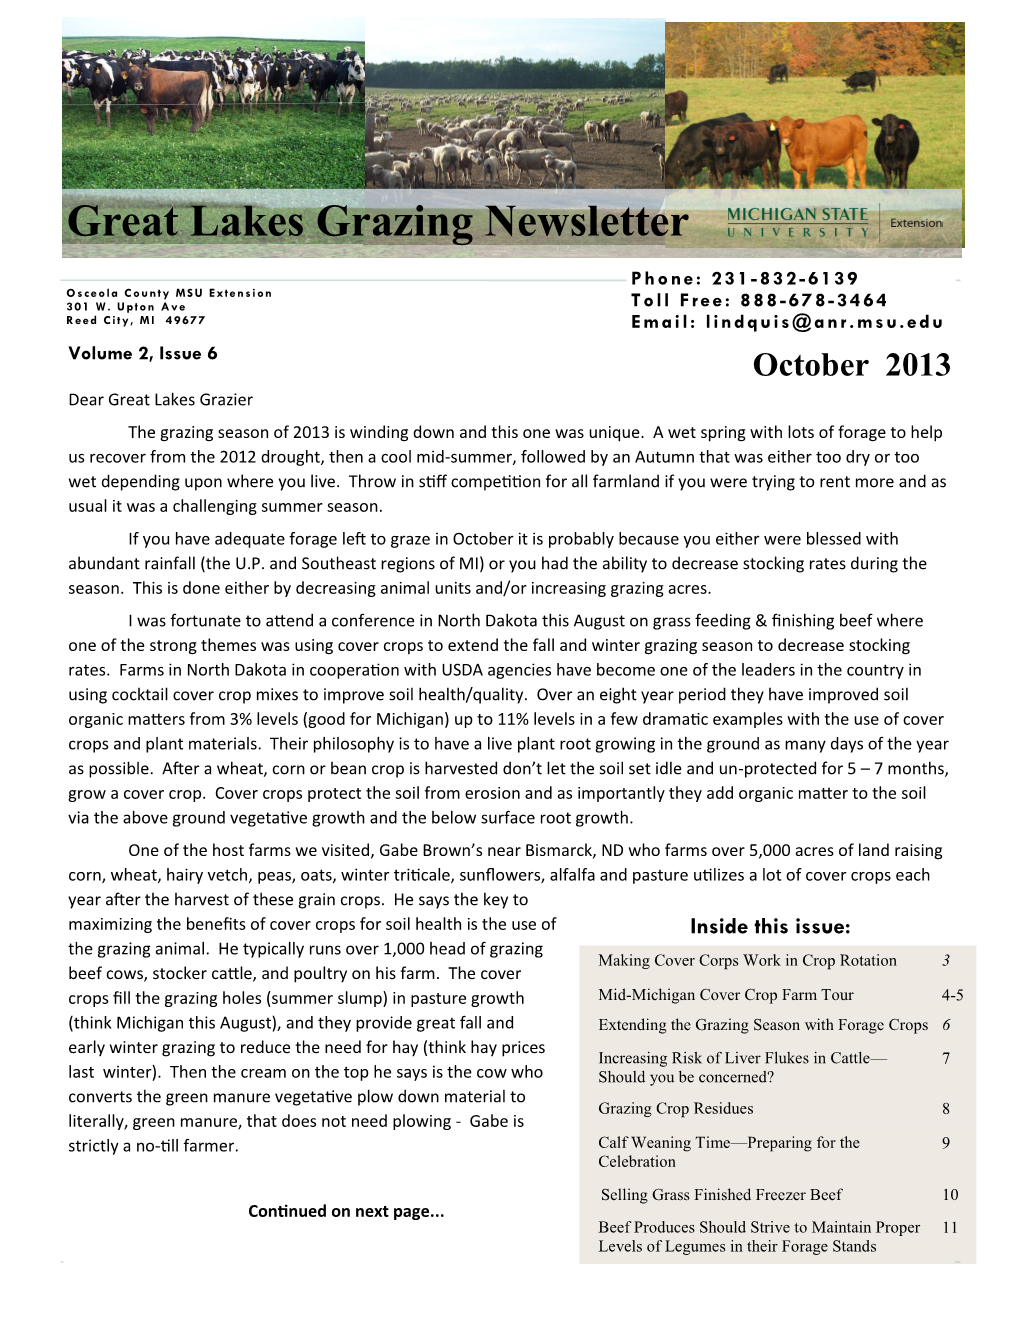 Great Lakes Grazing Newsletter